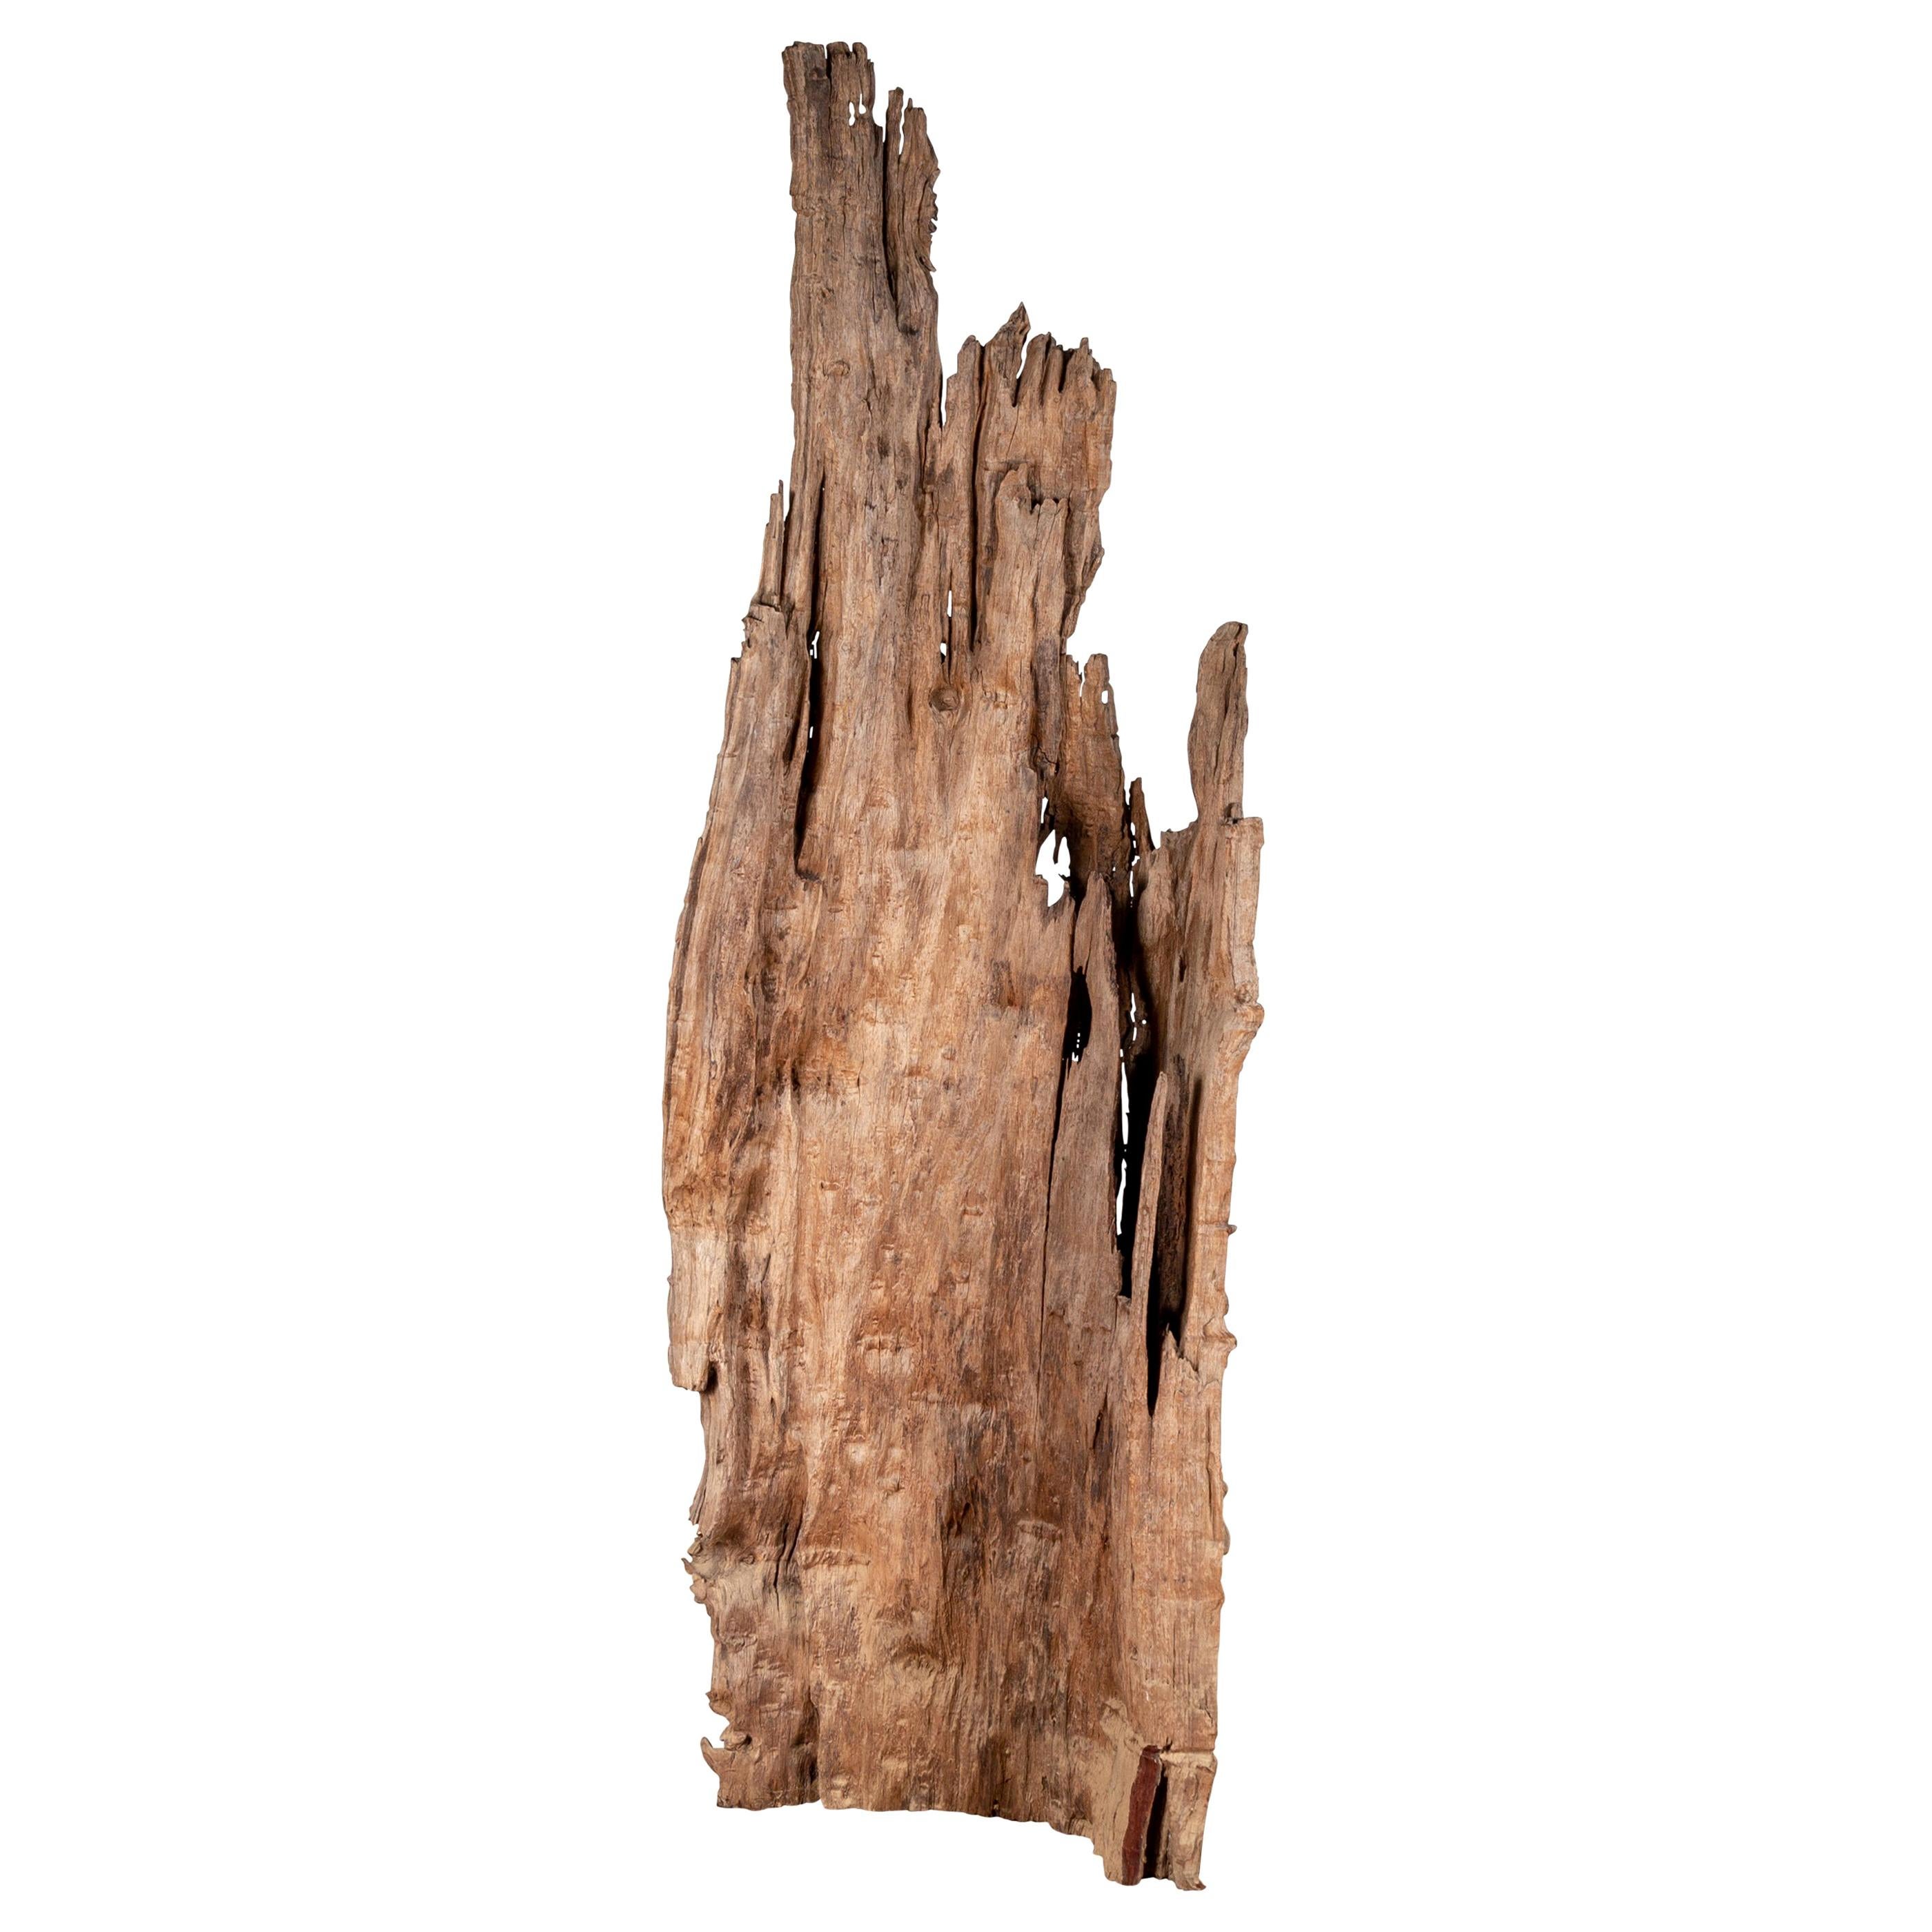 Ancient Driftwood Carving from Northern Thailand Found in the Chiang Mai Region